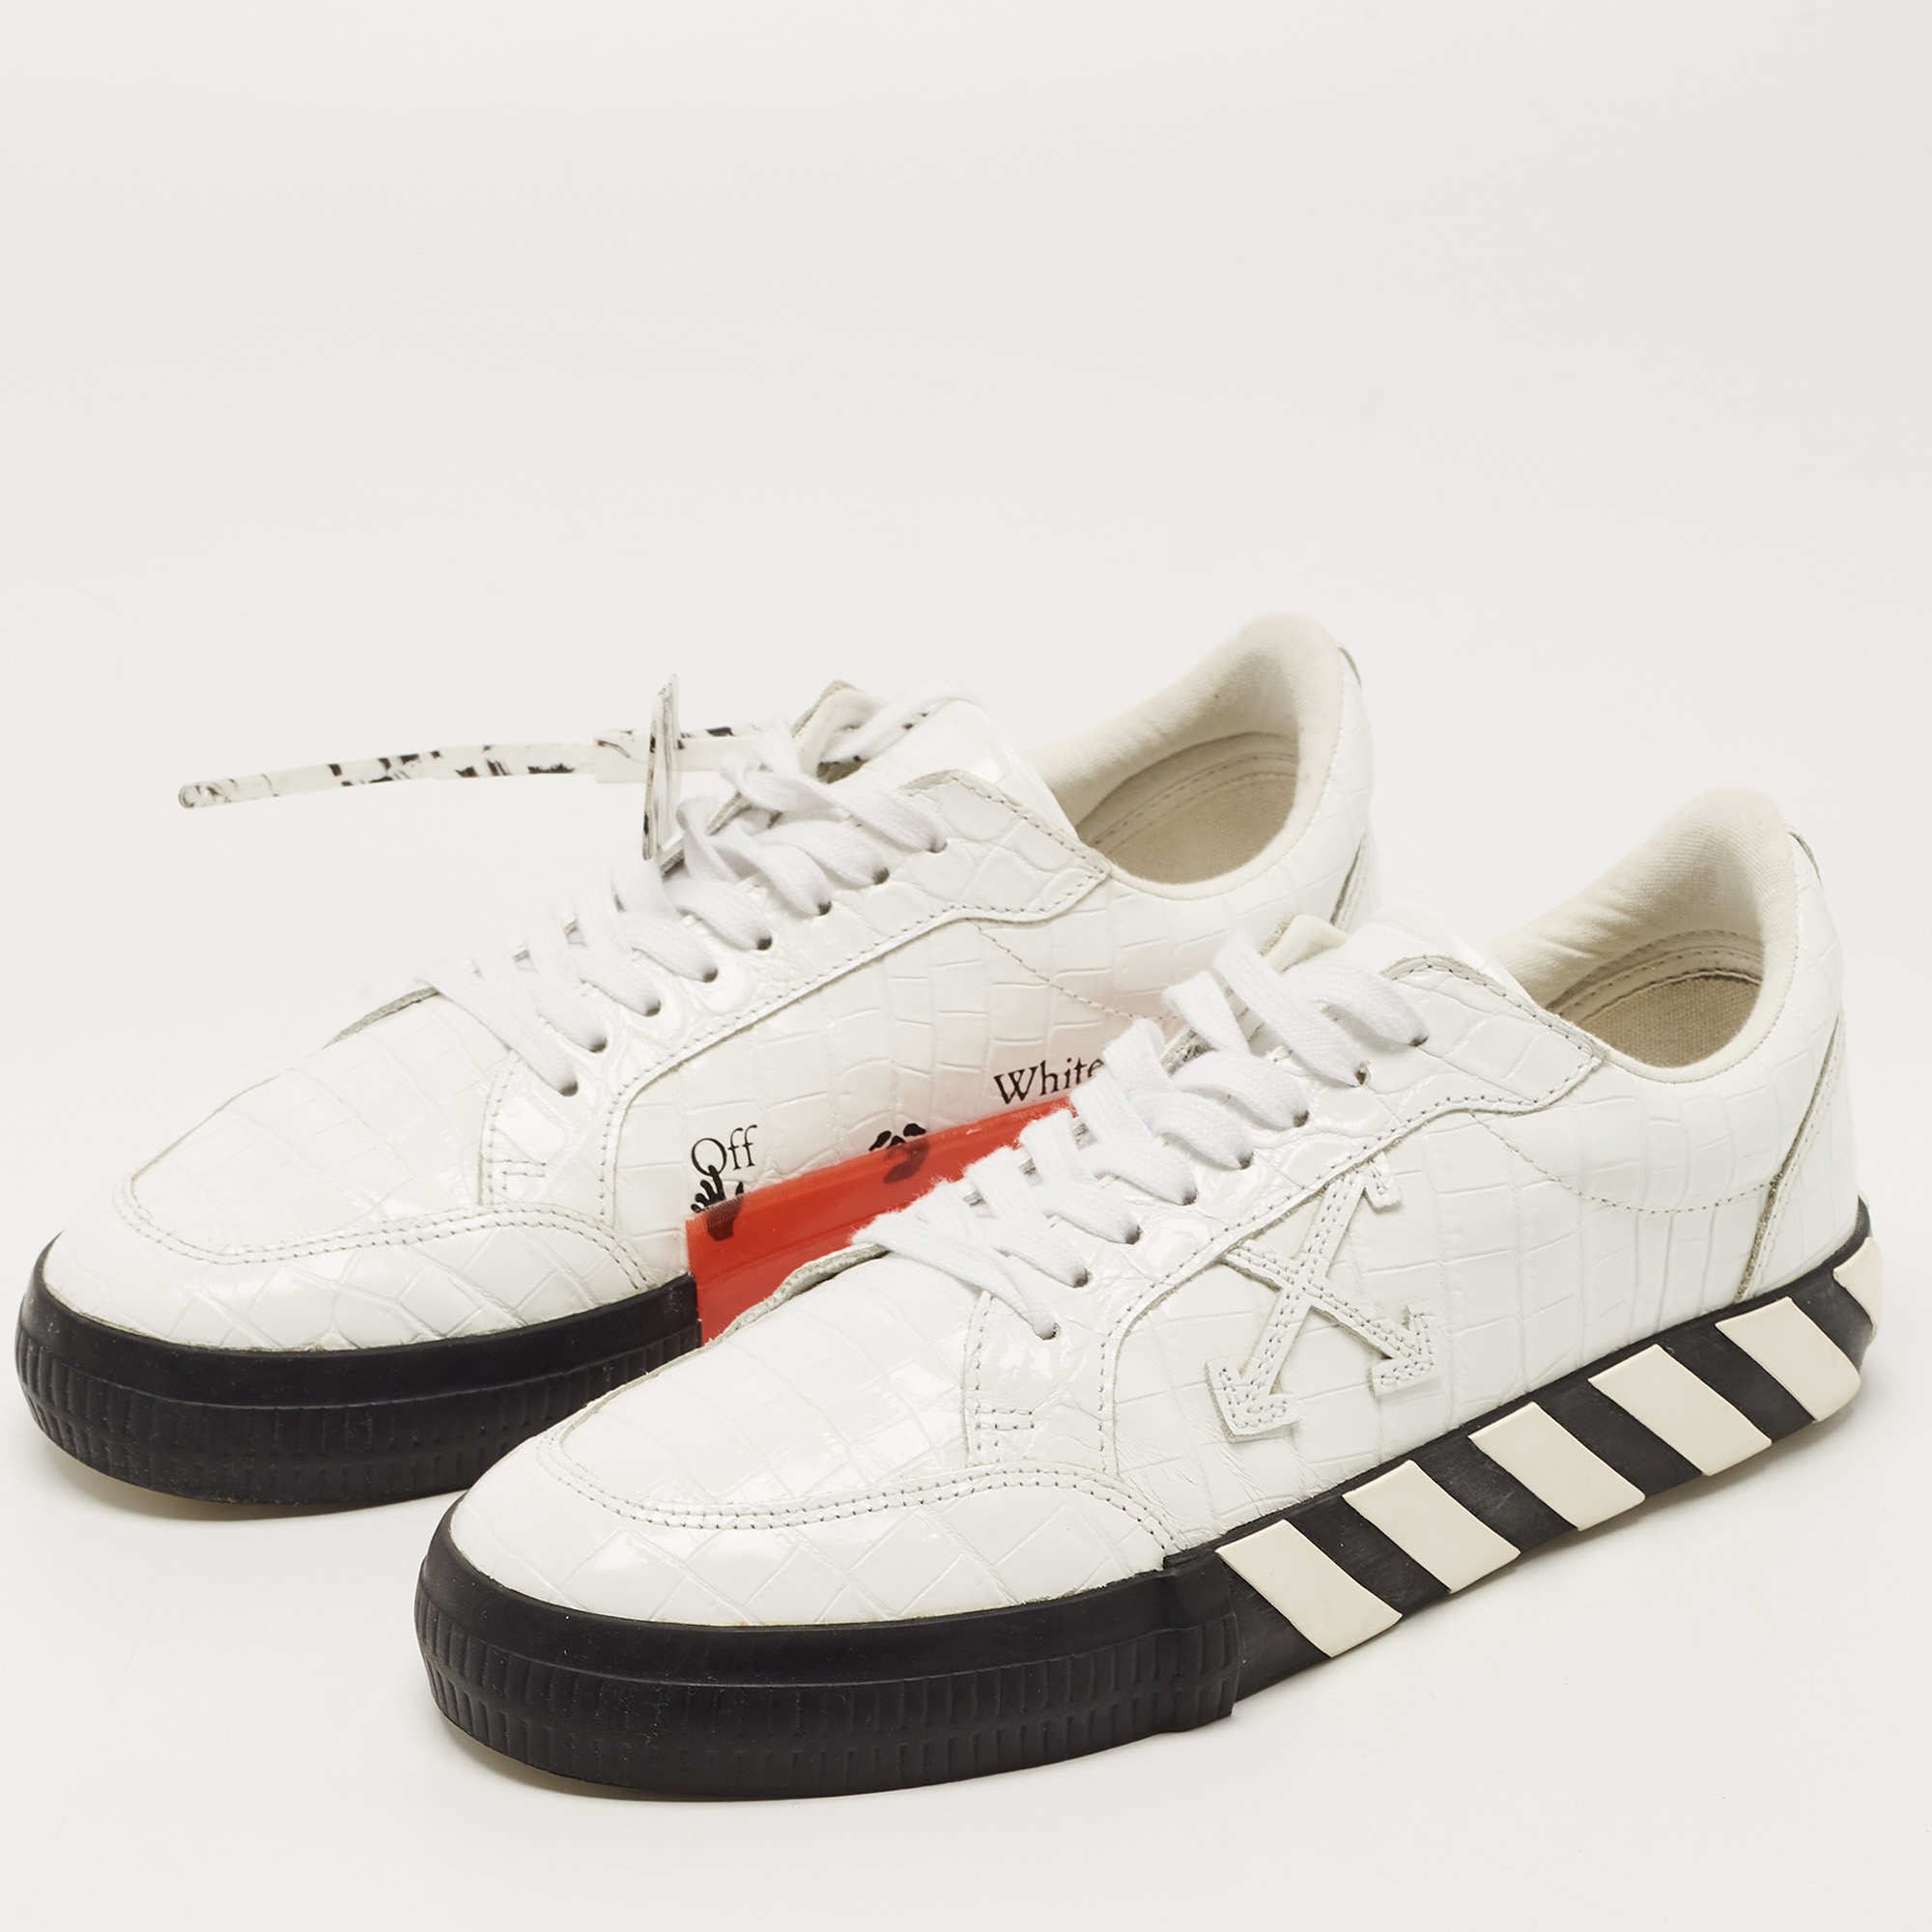 

Off-White White/Black Croc Embossed Leather Vulcanized Low Top Sneakers Size